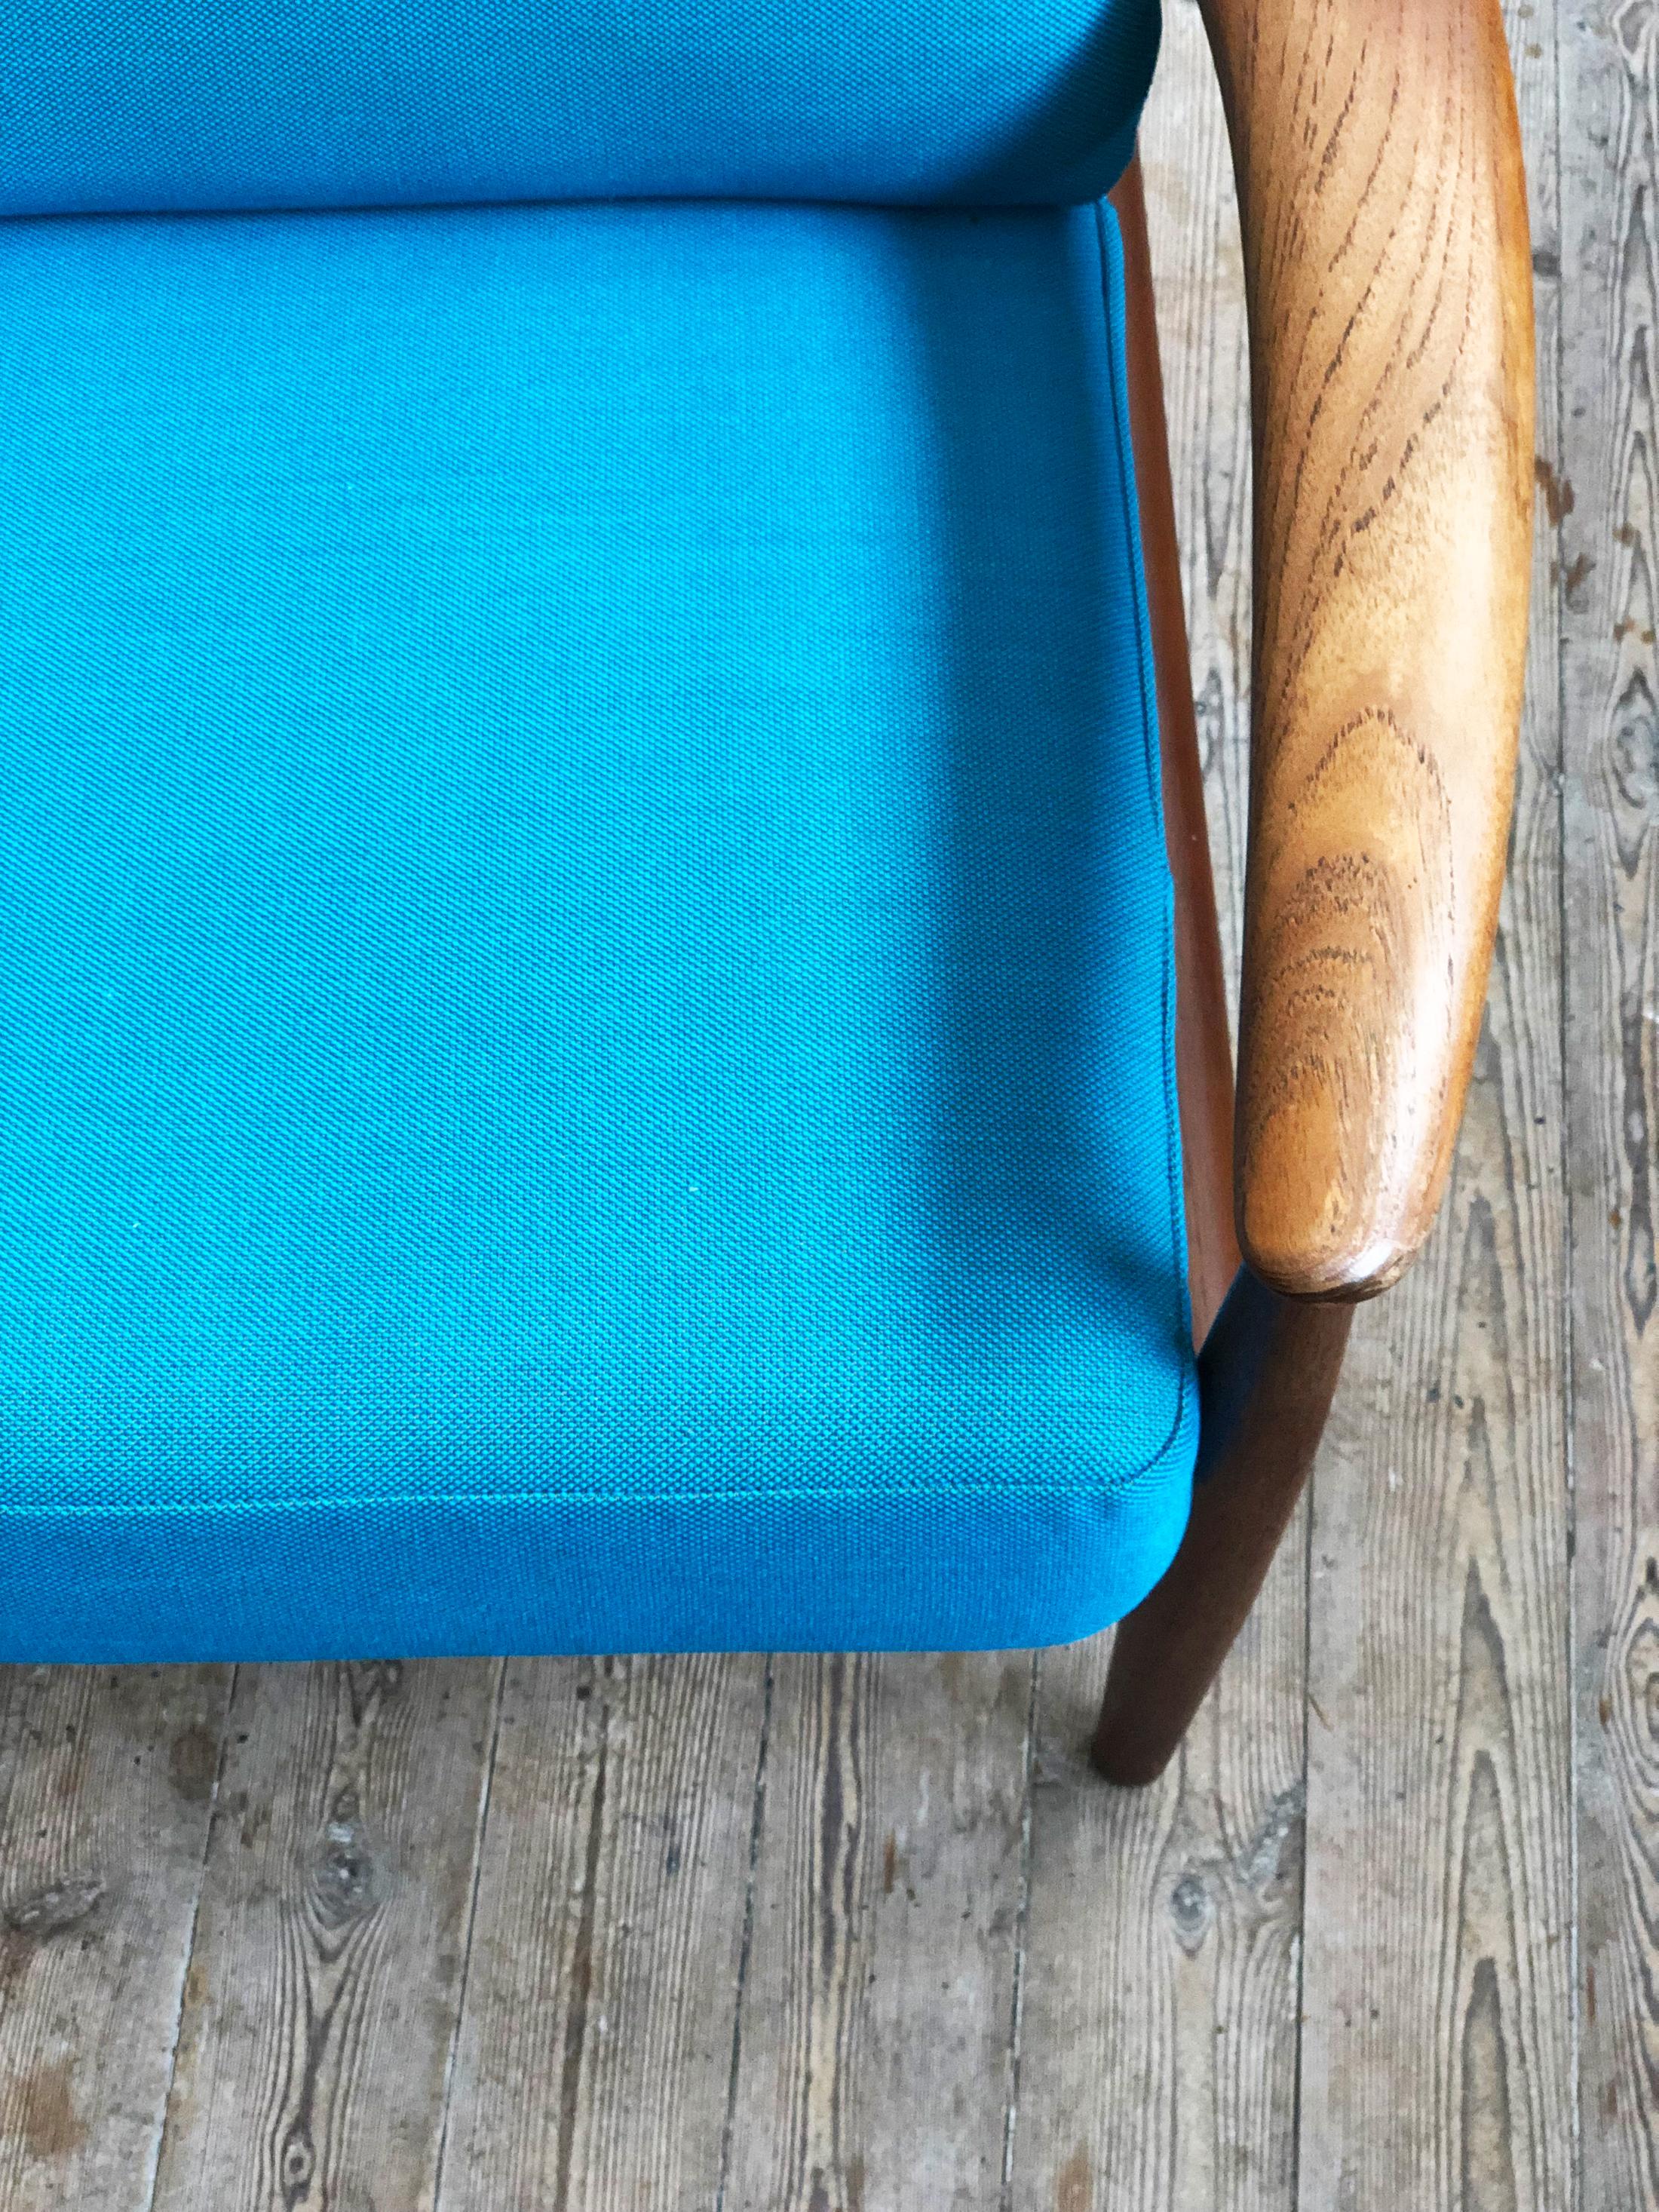 Midcentury Teak Sofa with Turquoise Upholstery by Grete Jalk for France & Son  For Sale 5